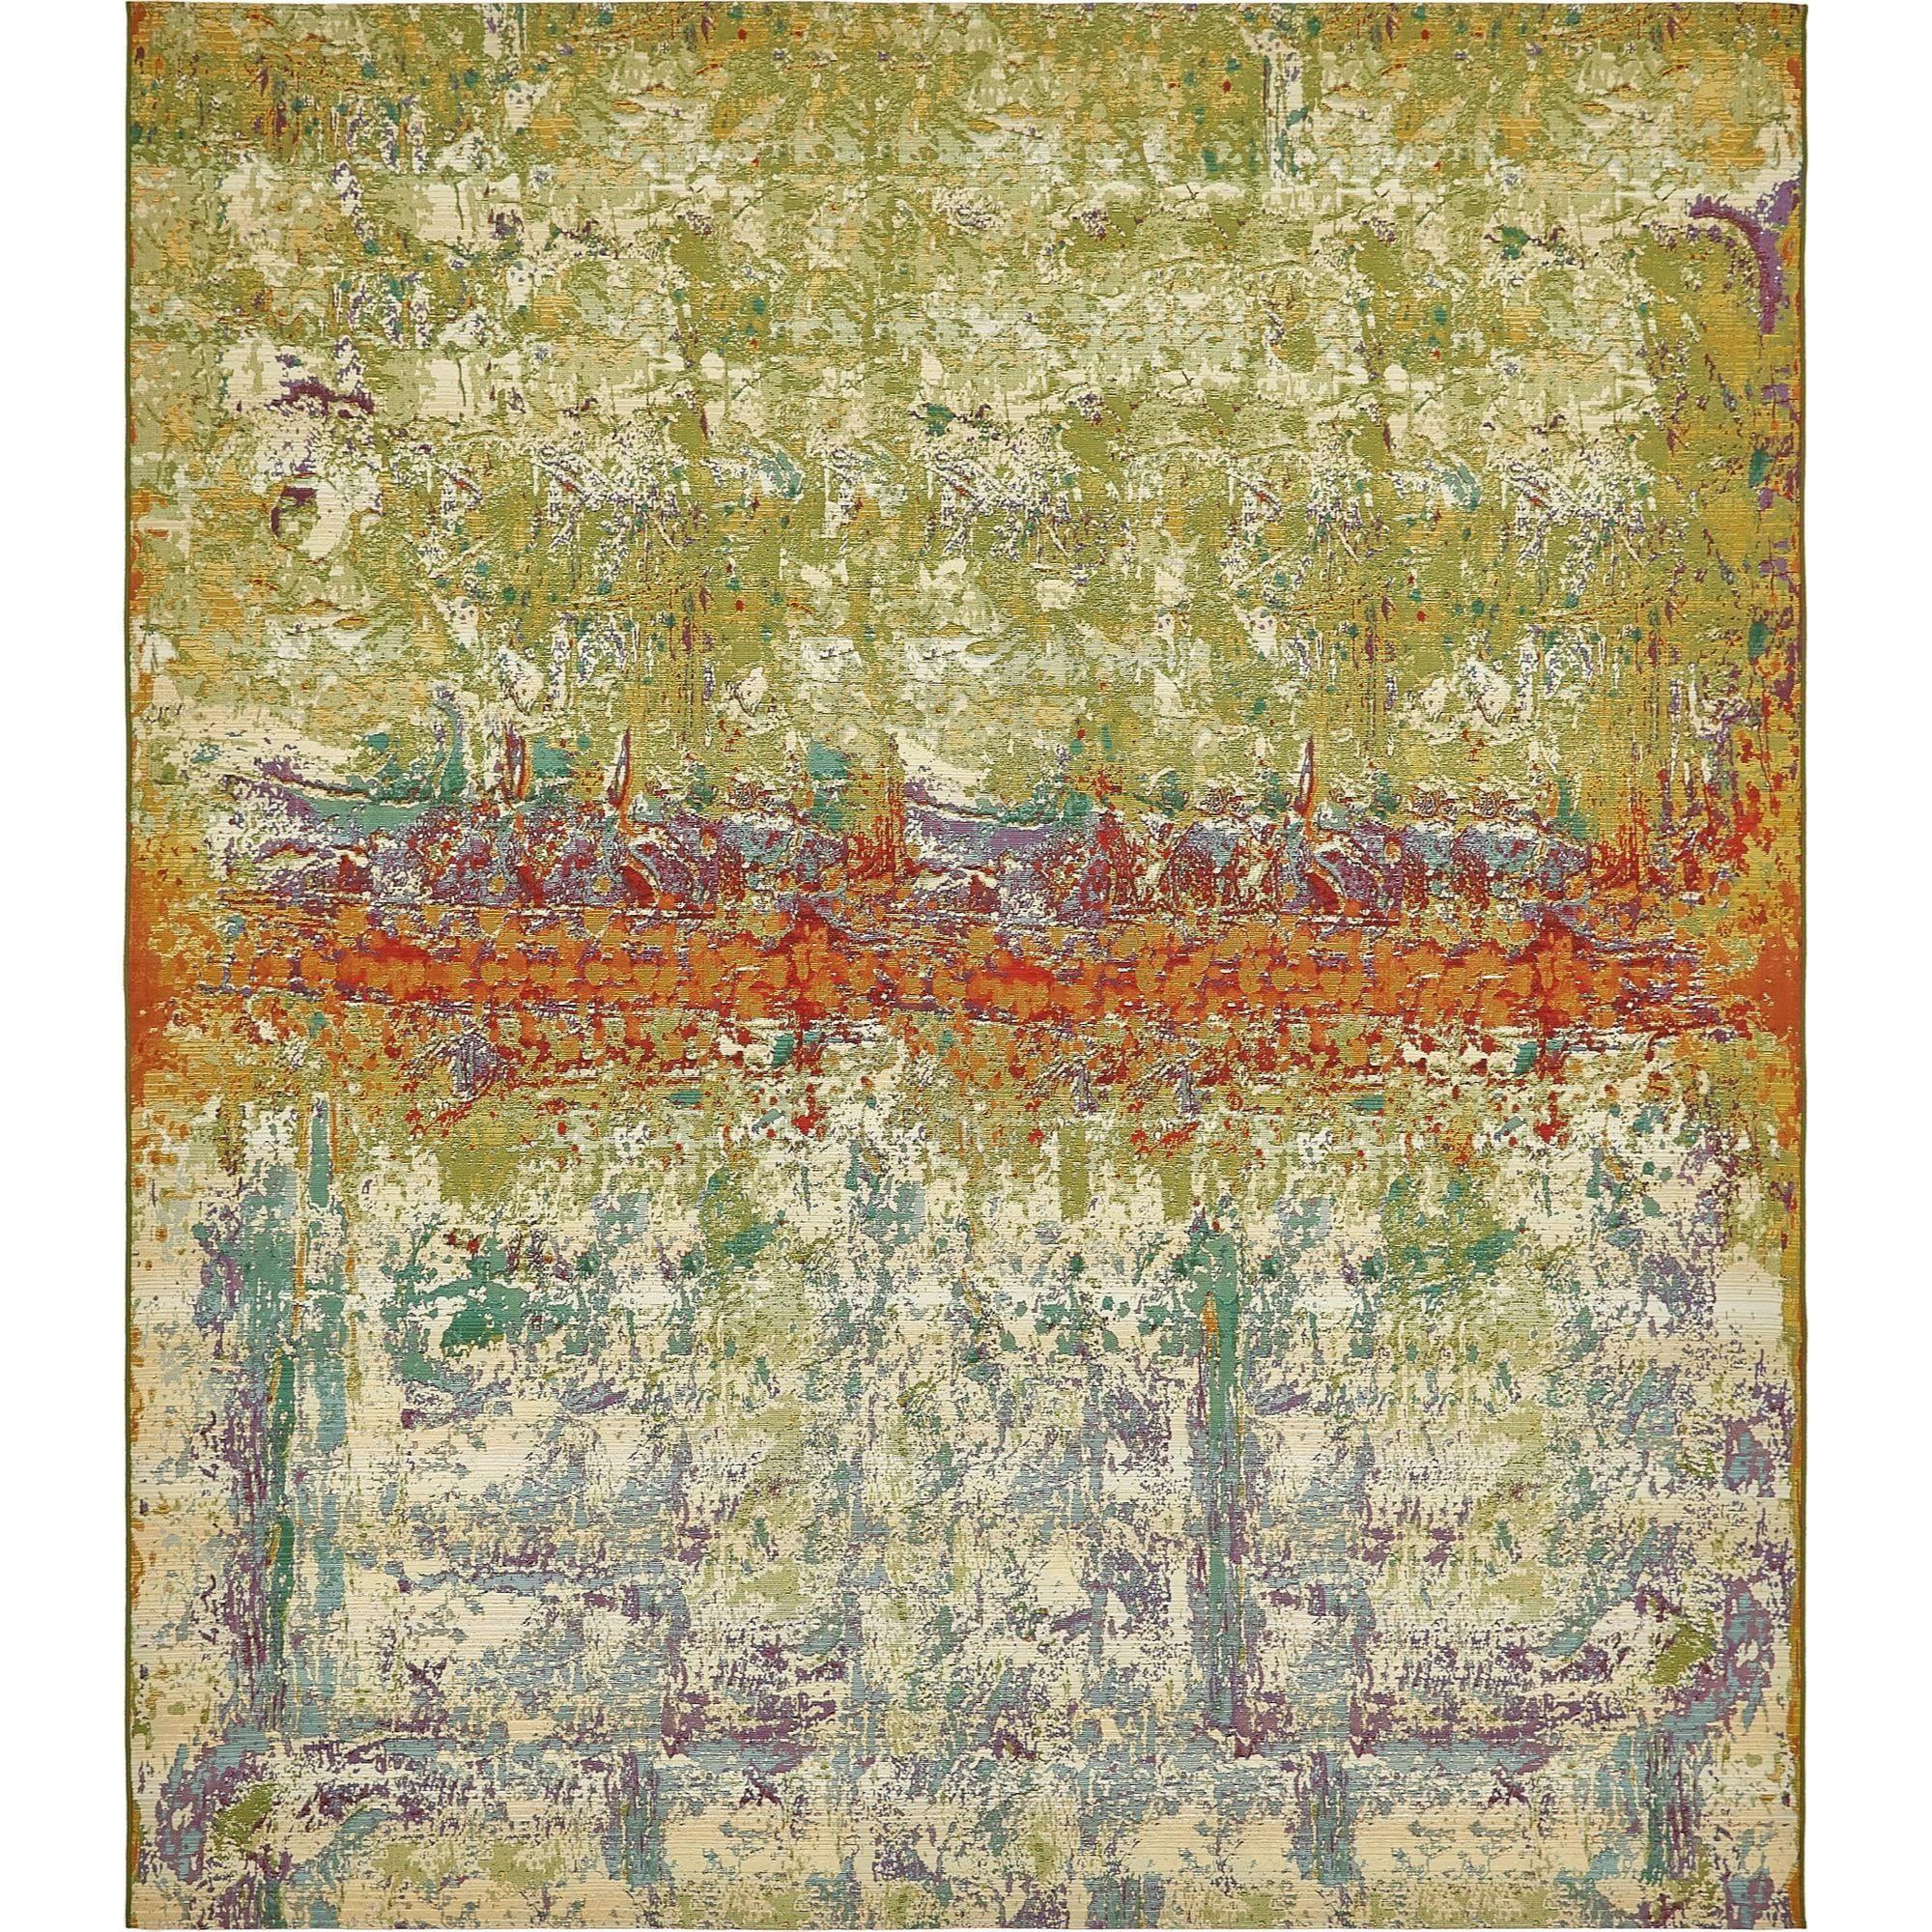 Vibrant Harmony 10' x 12' Multi-Color Abstract Outdoor Rug